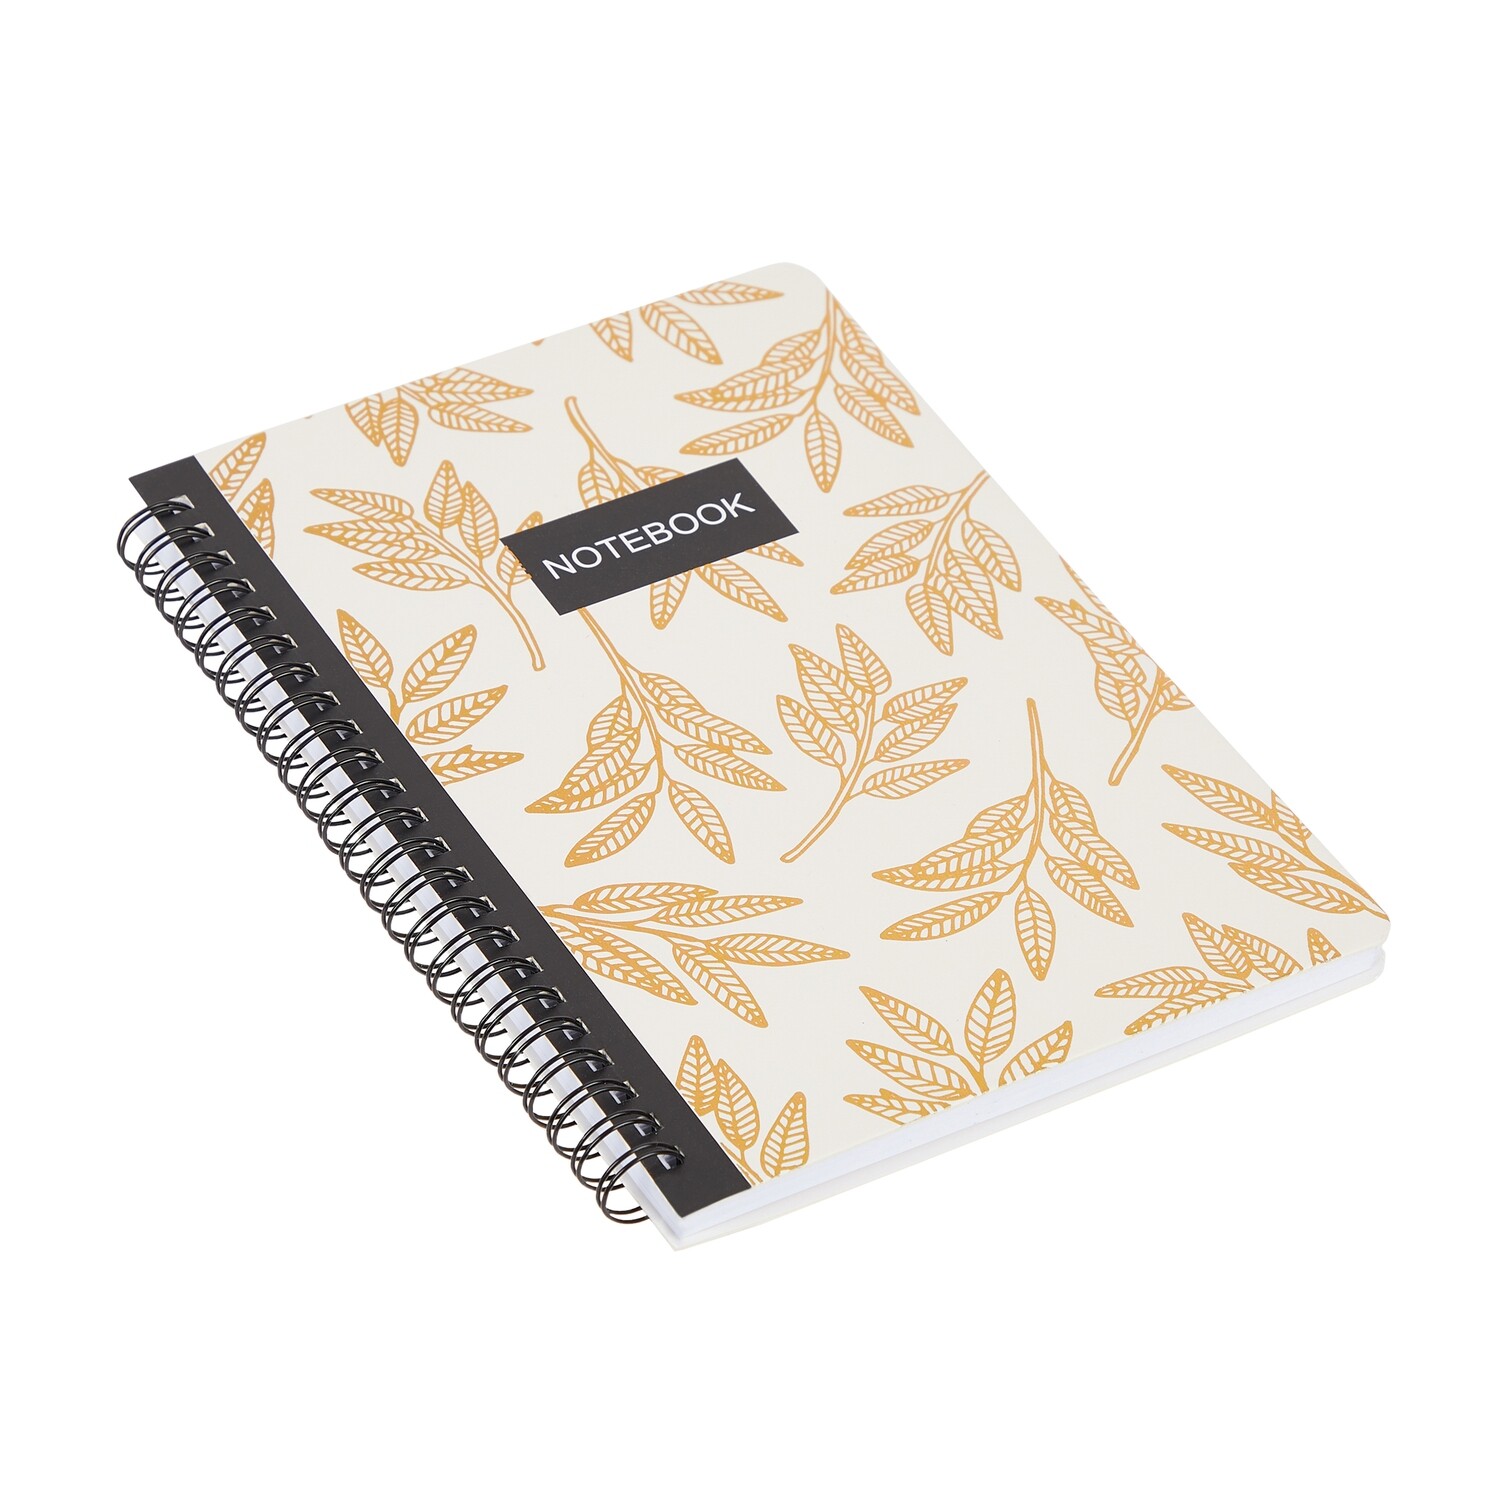 Leaves - A5 Spiral Lined Notebook